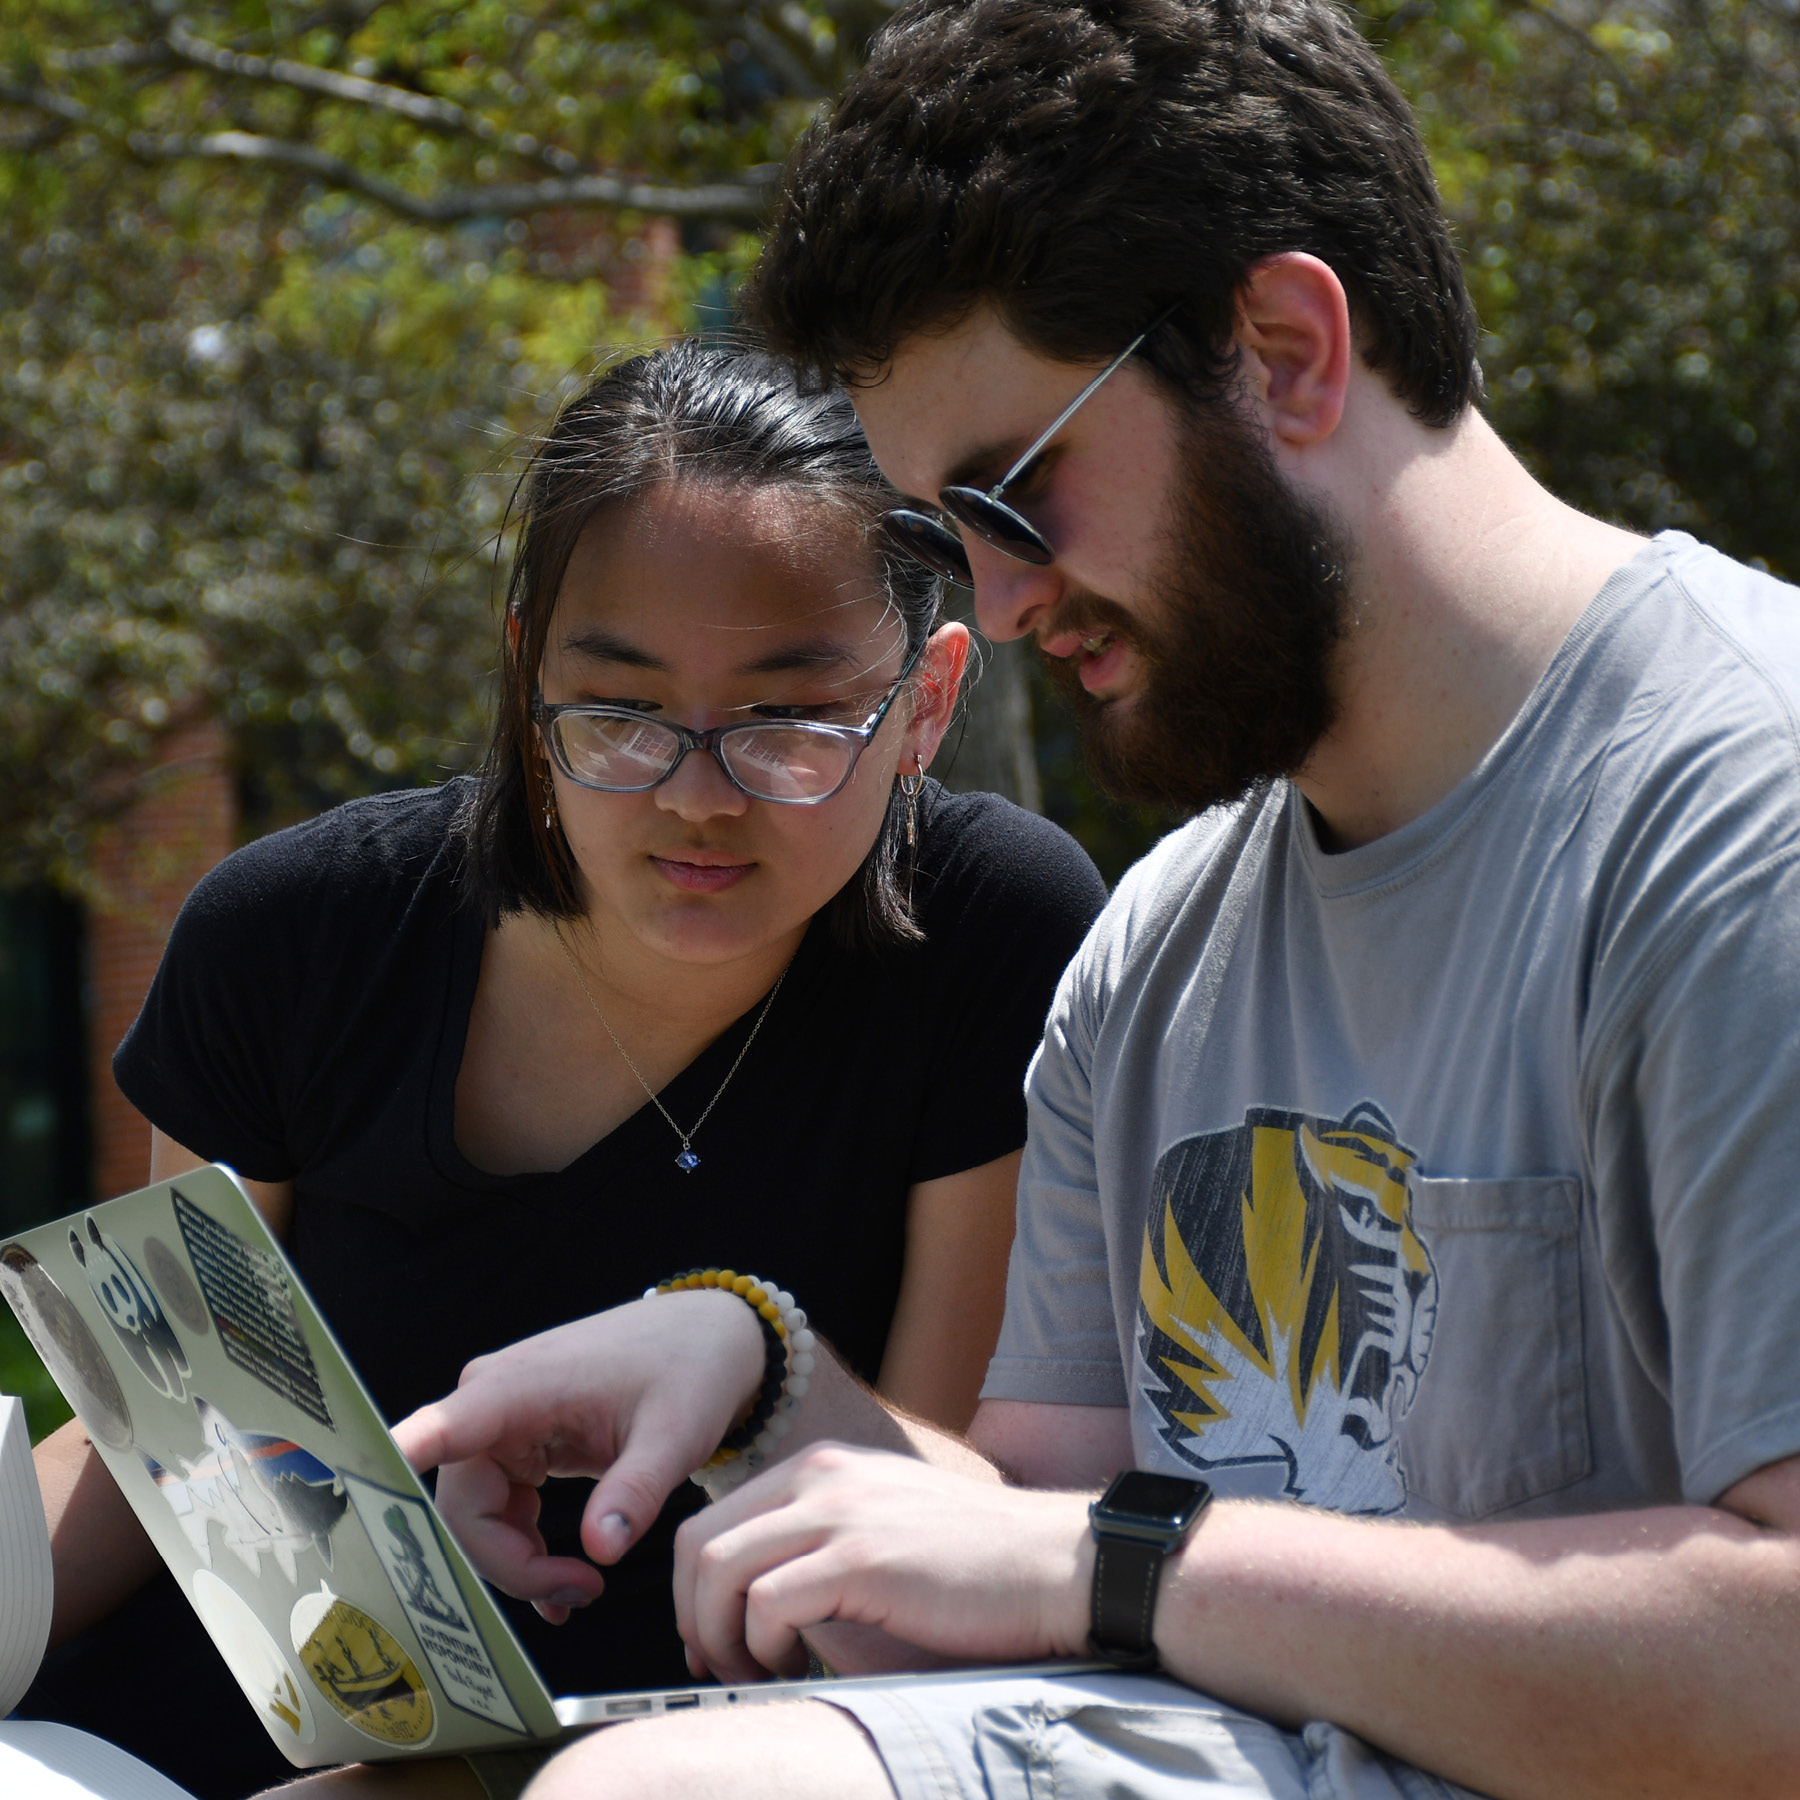 Two students sit outdoors looking at an assignment on a laptop.